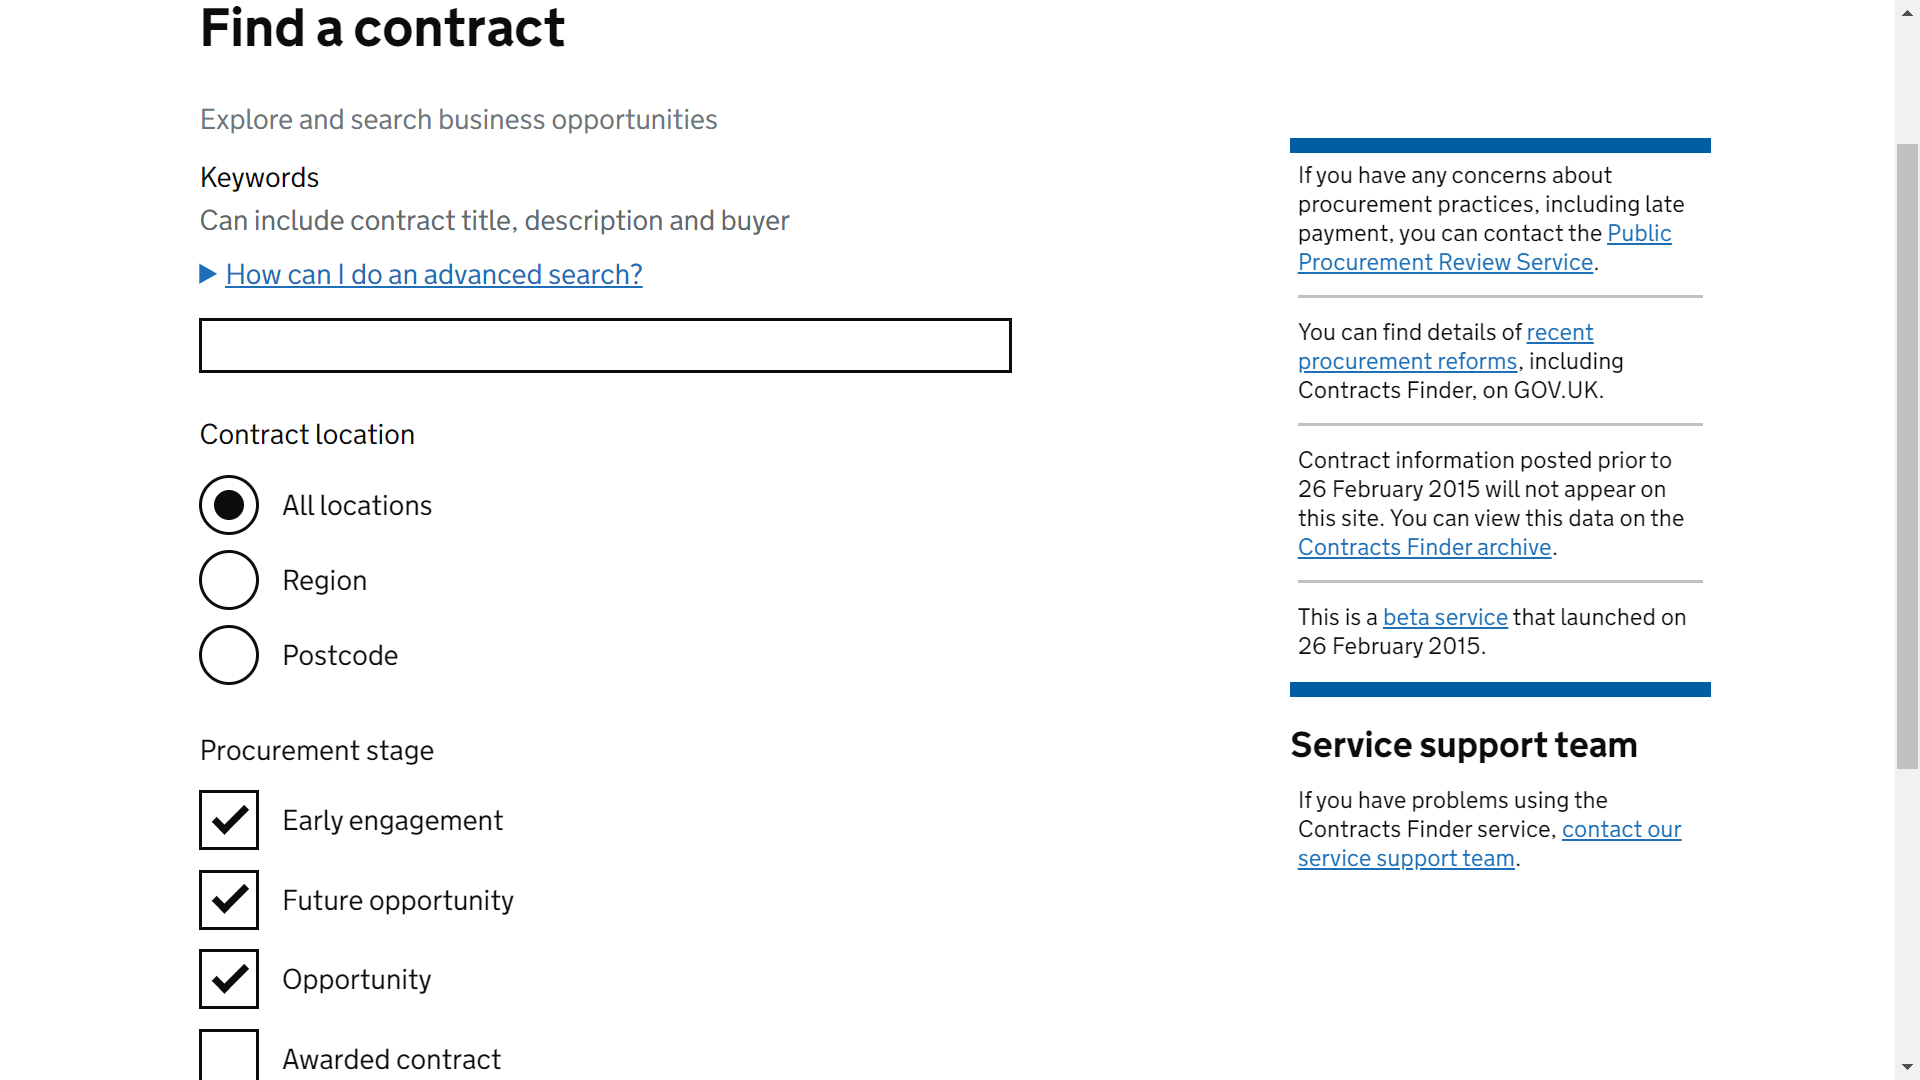 Homepage screenshot of the Contracts Finder showcasing the filters available to find government contracts